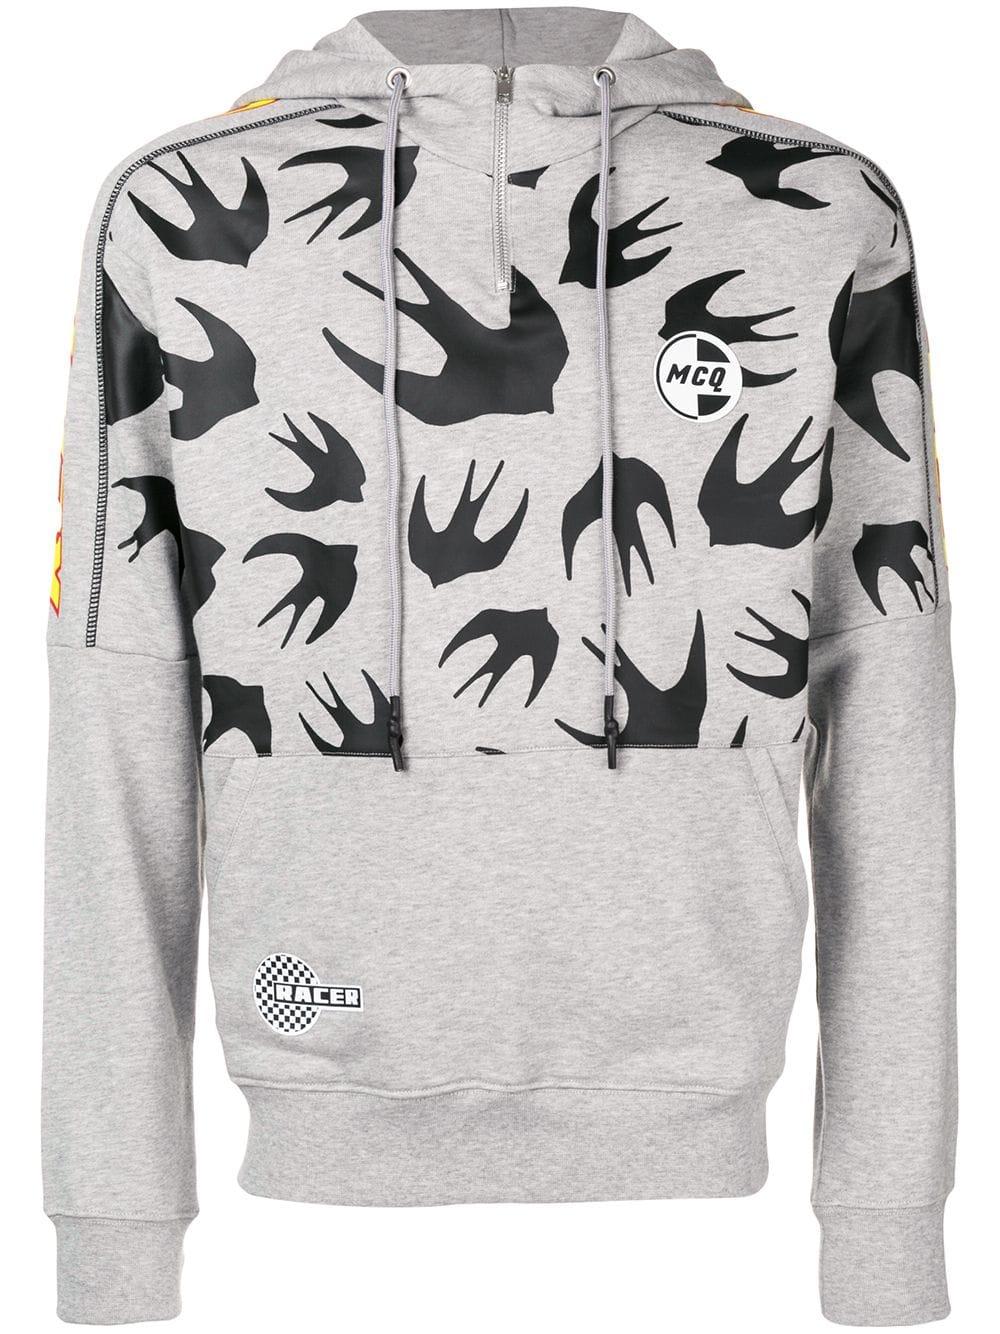 McQ Cotton Swallow Print Hoodie in Grey (Gray) for Men - Lyst